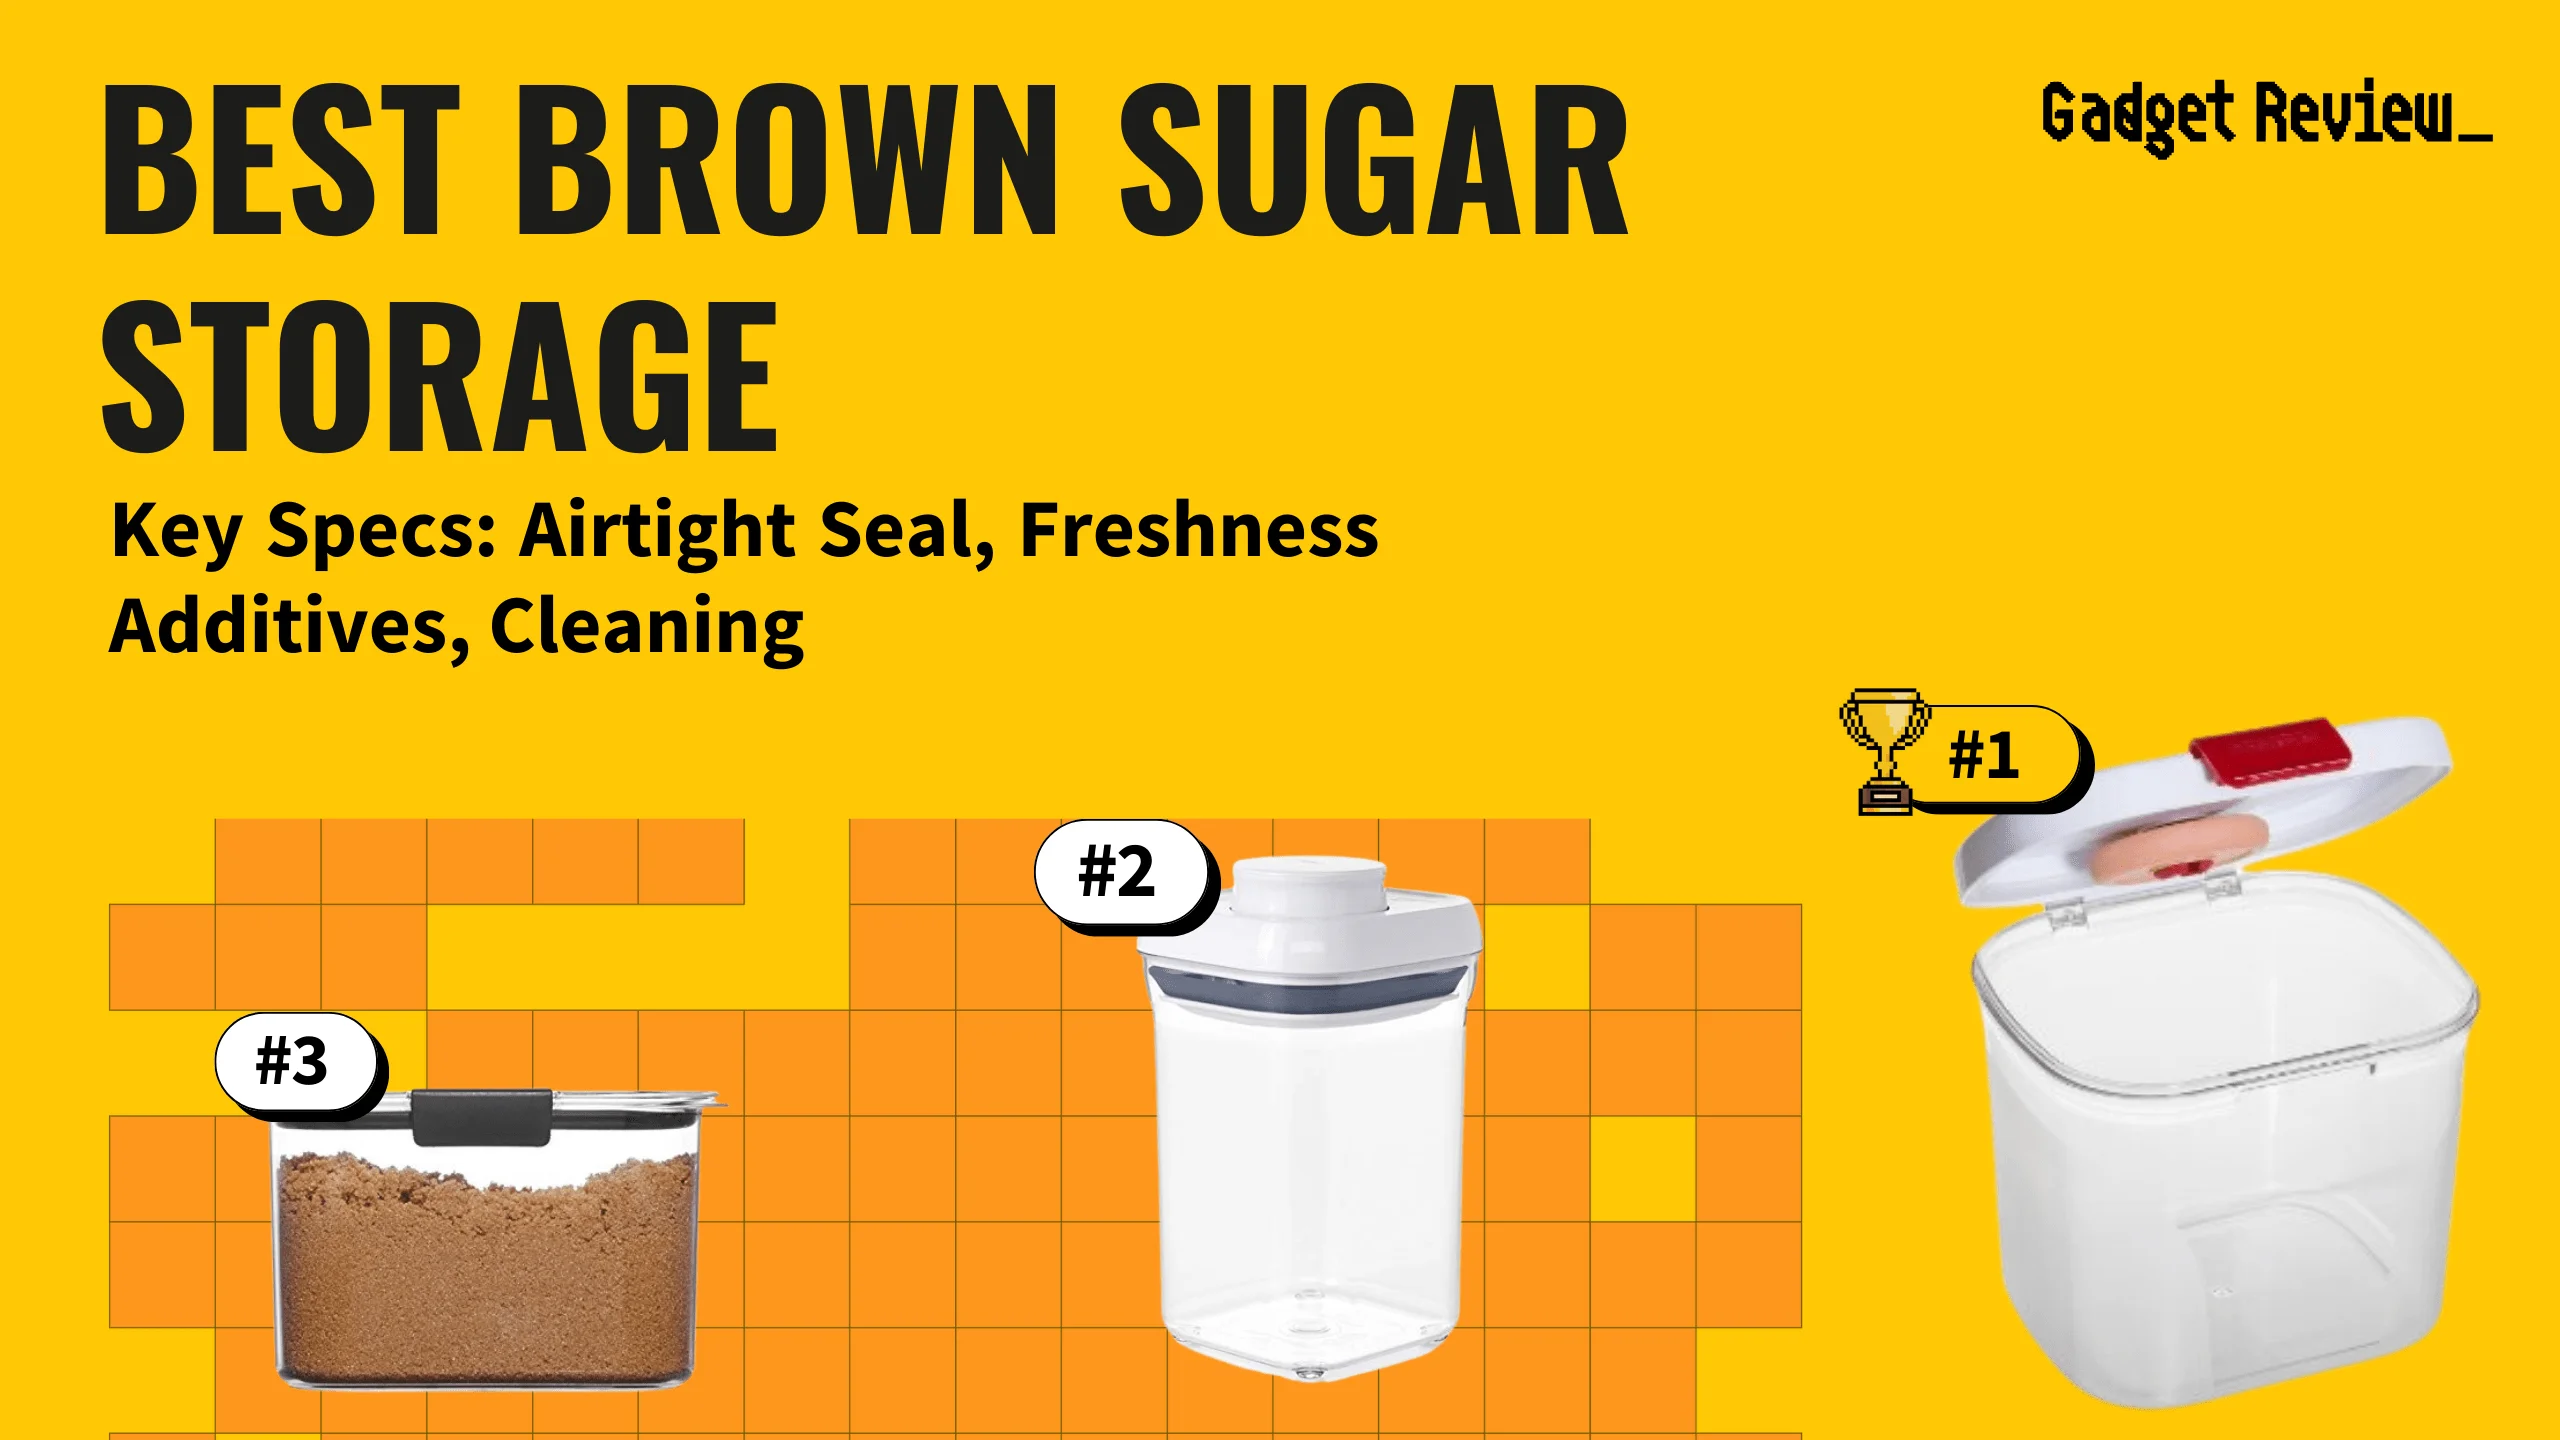 best brown sugar storage featured image that shows the top three best kitchen product models